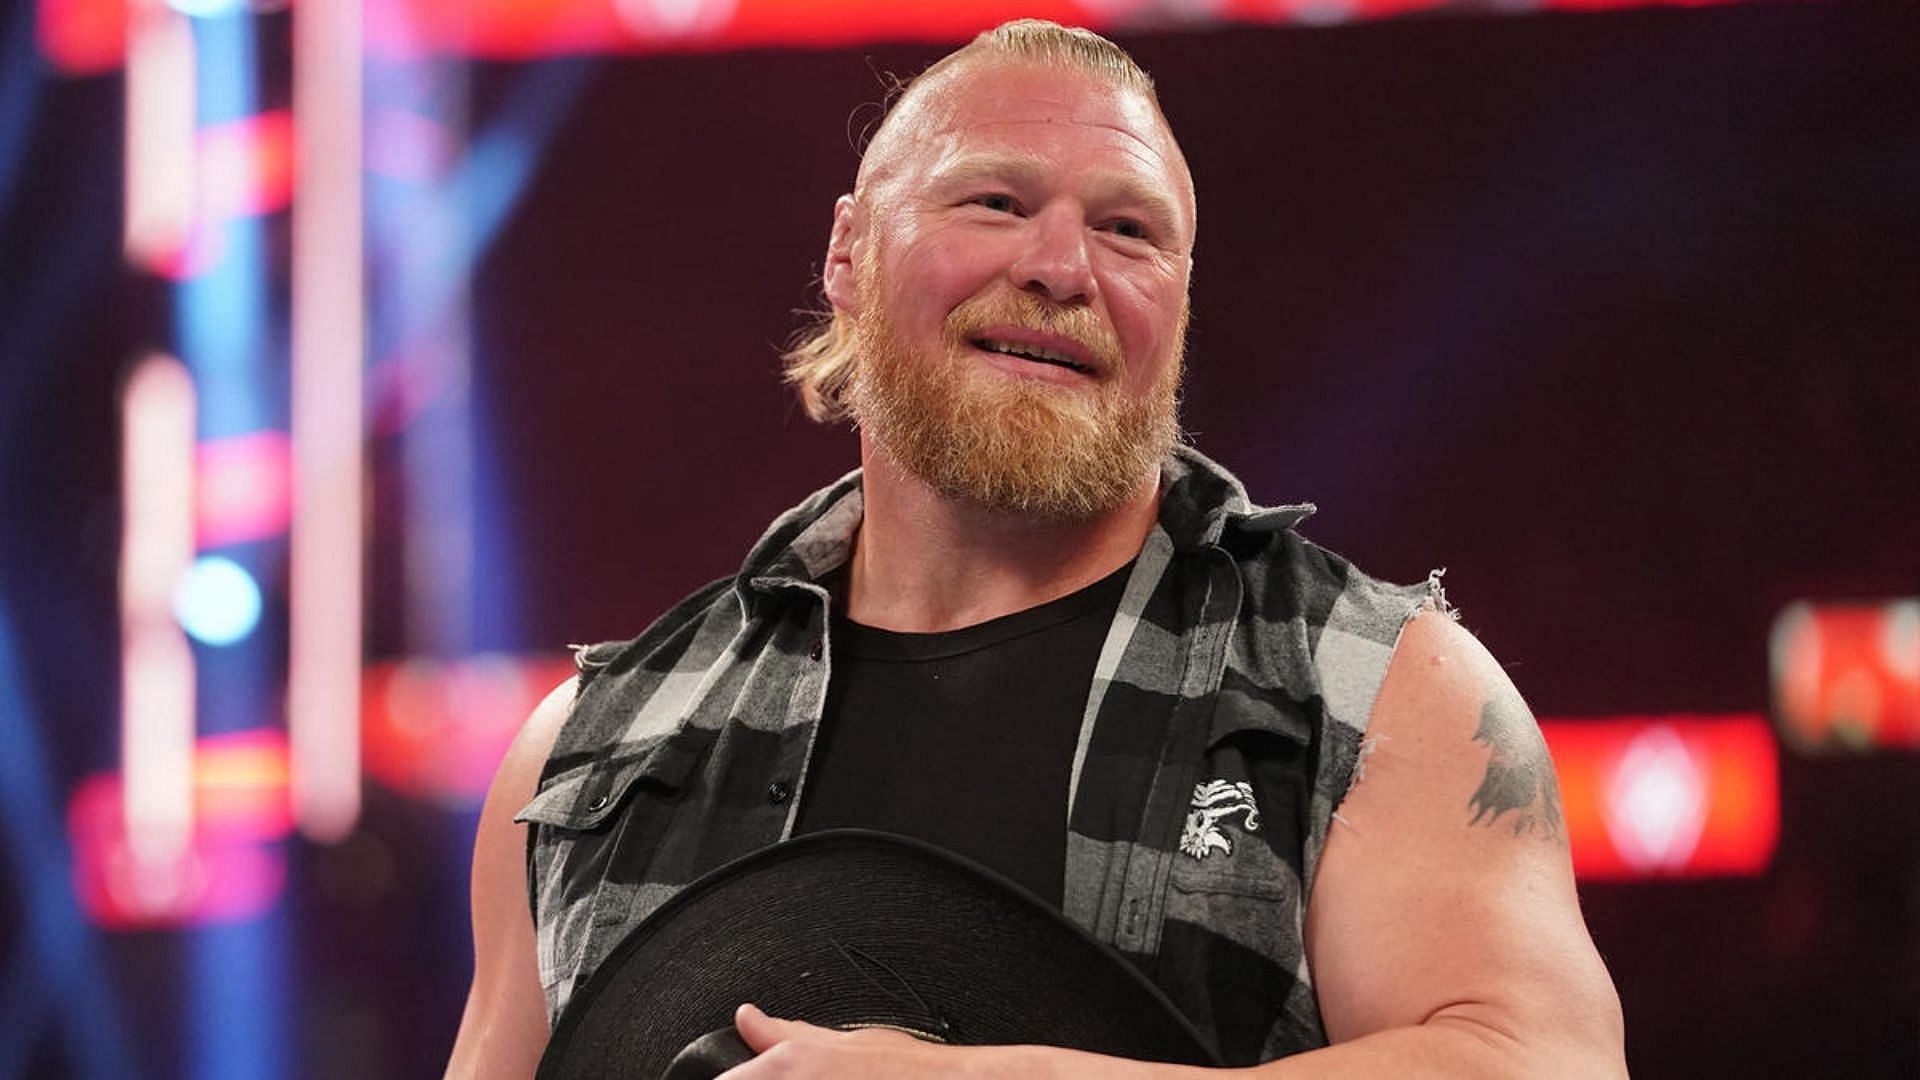 Brock Lesnar posed for a picture with a big name before Crown Jewel 2022